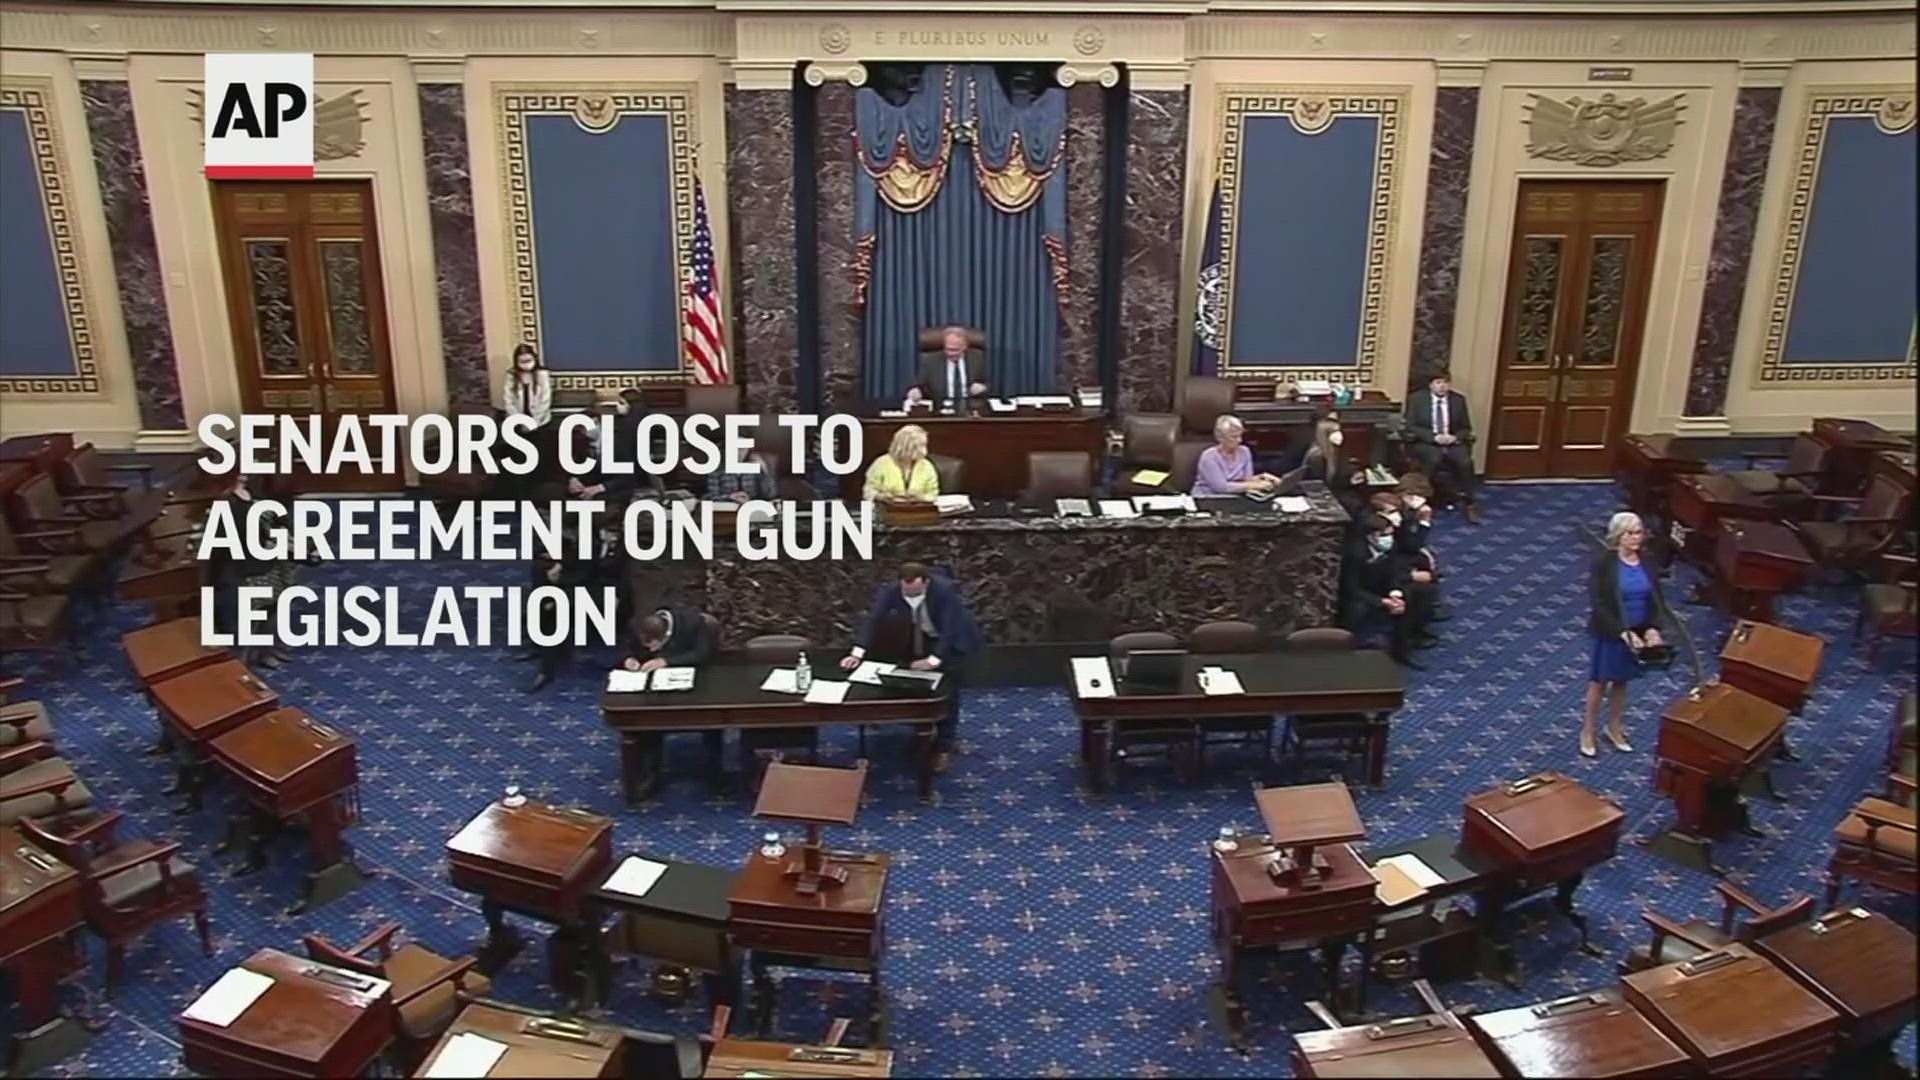 Lawmakers released the 80-page bill nine days after agreeing to a framework for the plan and 29 years after Congress last enacted major firearms curbs.